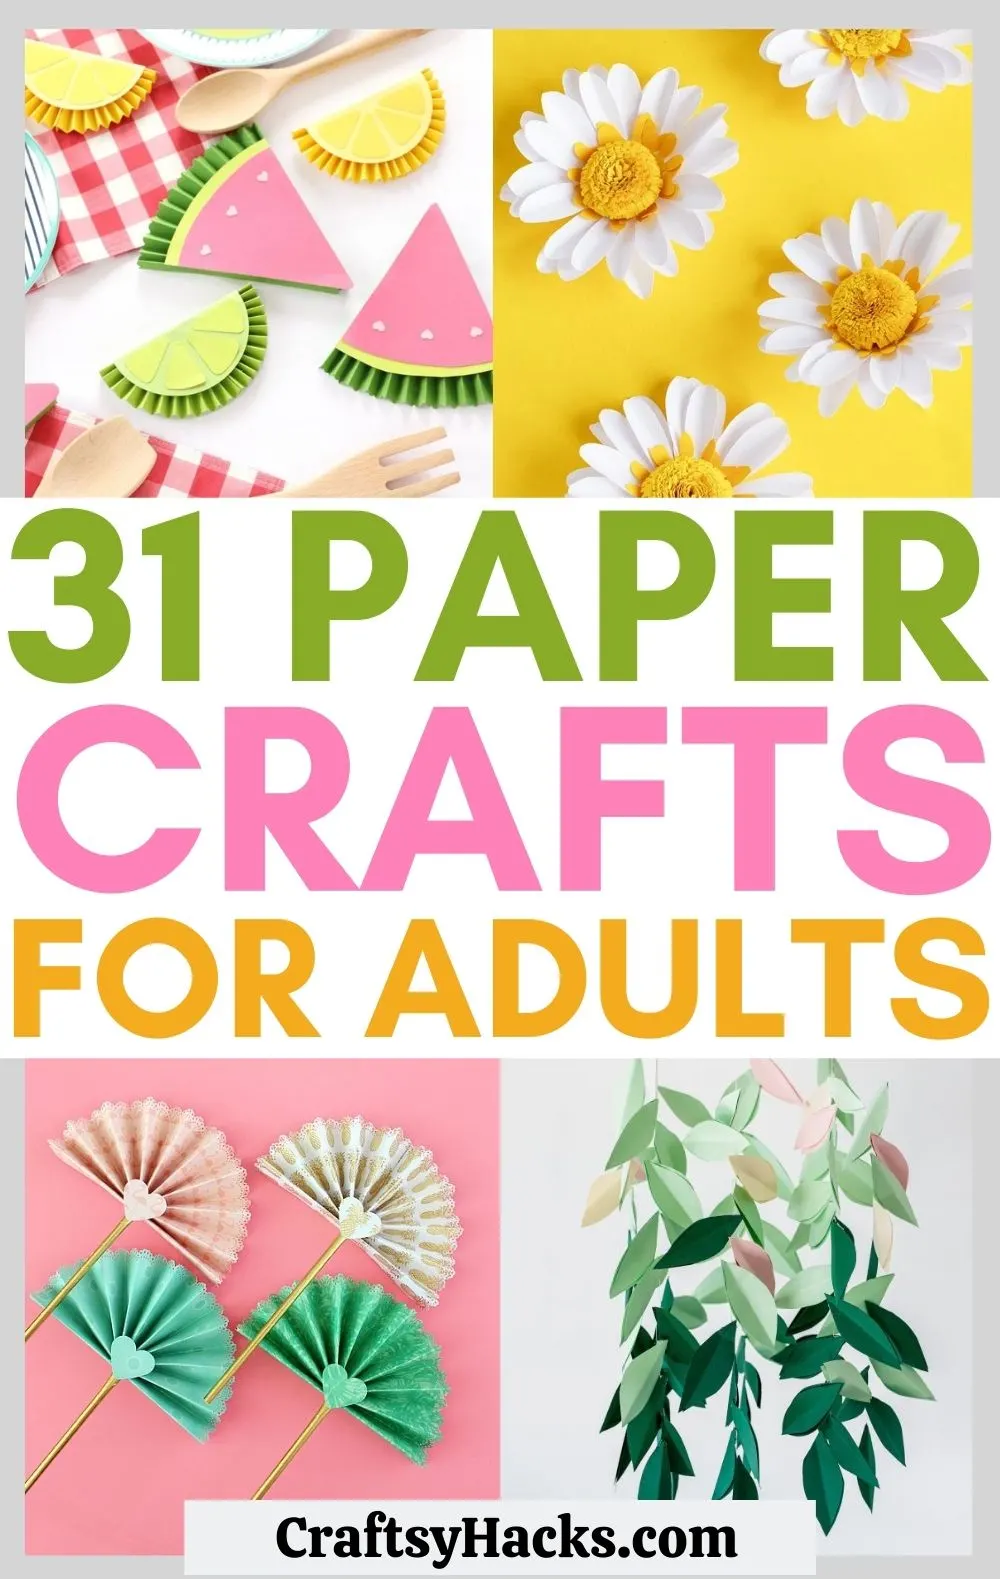 Top 31 Paper Craft Templates - Paper Craft Ideas for Kids